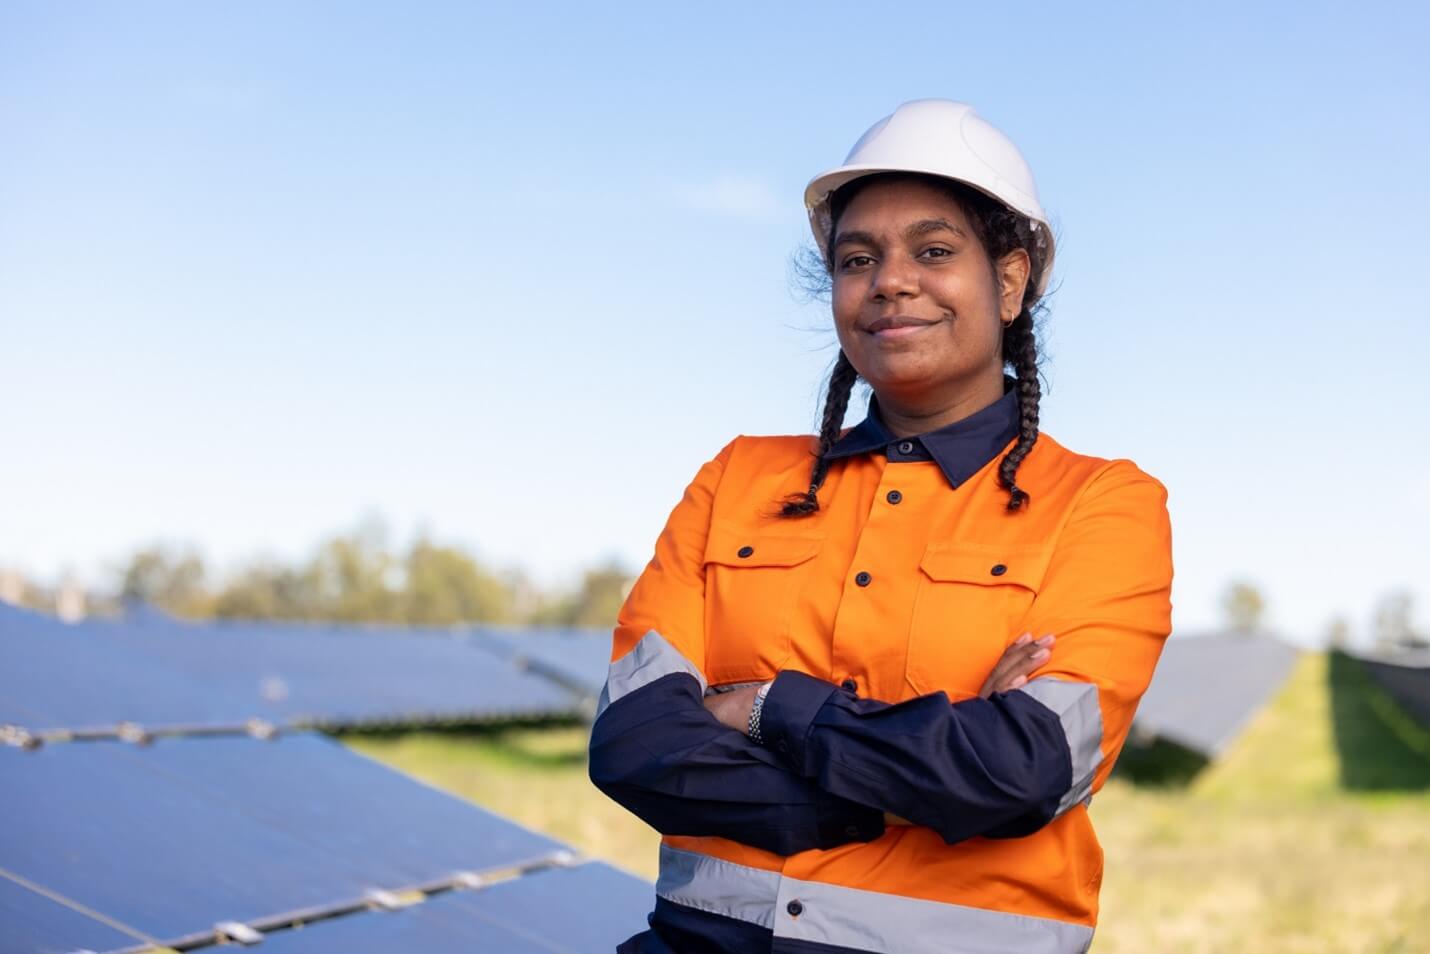 Young Aboriginal female in hard hat and orange hi-vis, standing confidently with arms crossed and smiling at the camera amongst a background of fixed to ground solar panels.